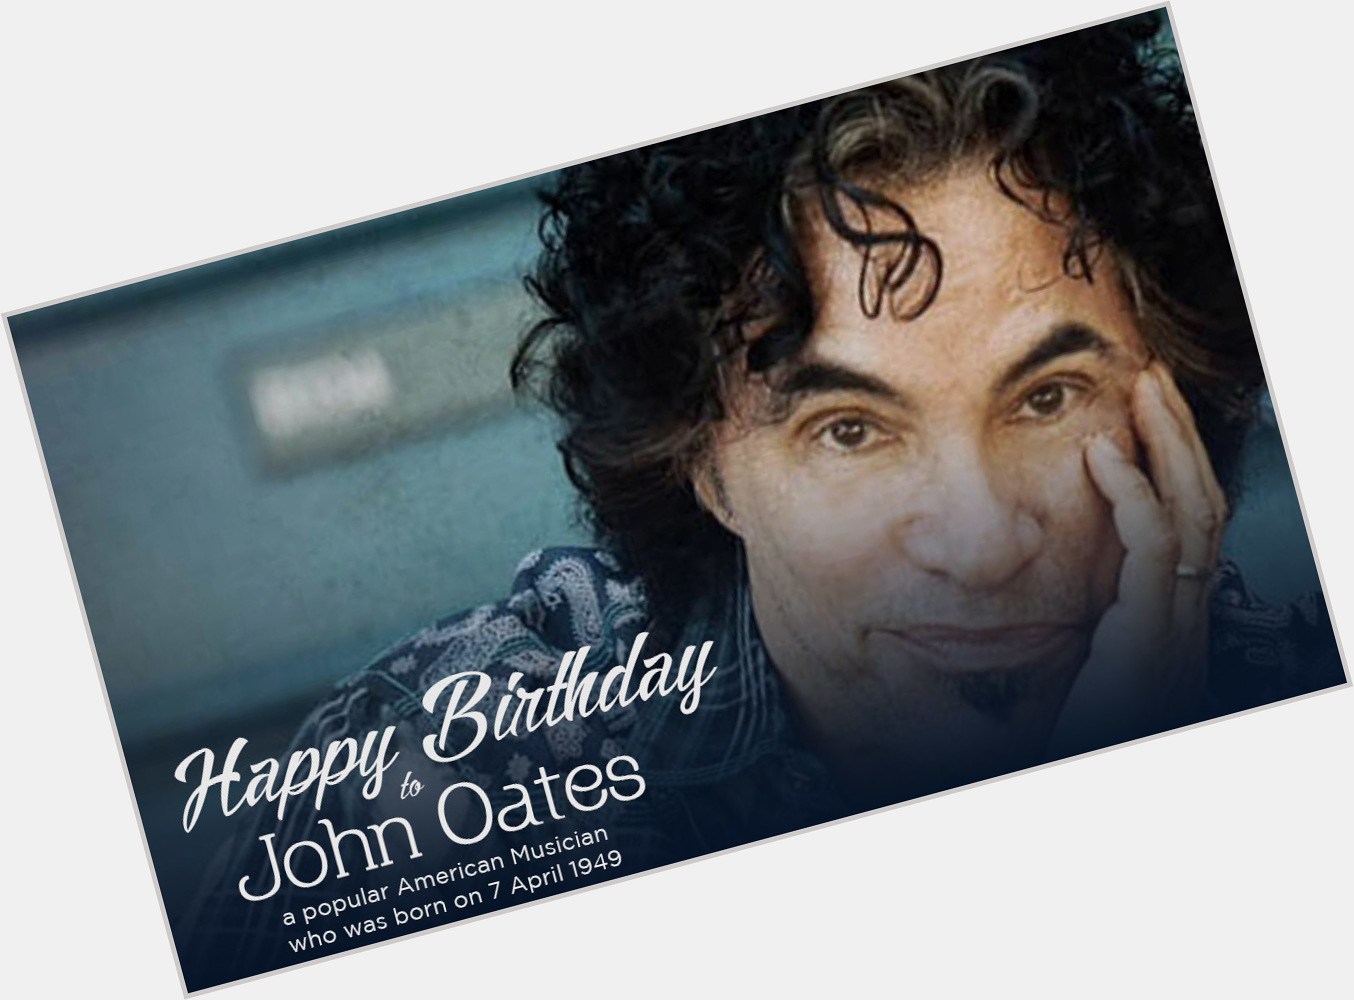 Happy Birthday to John Oates, a popular American Musician who was born on 7 April 1949. 